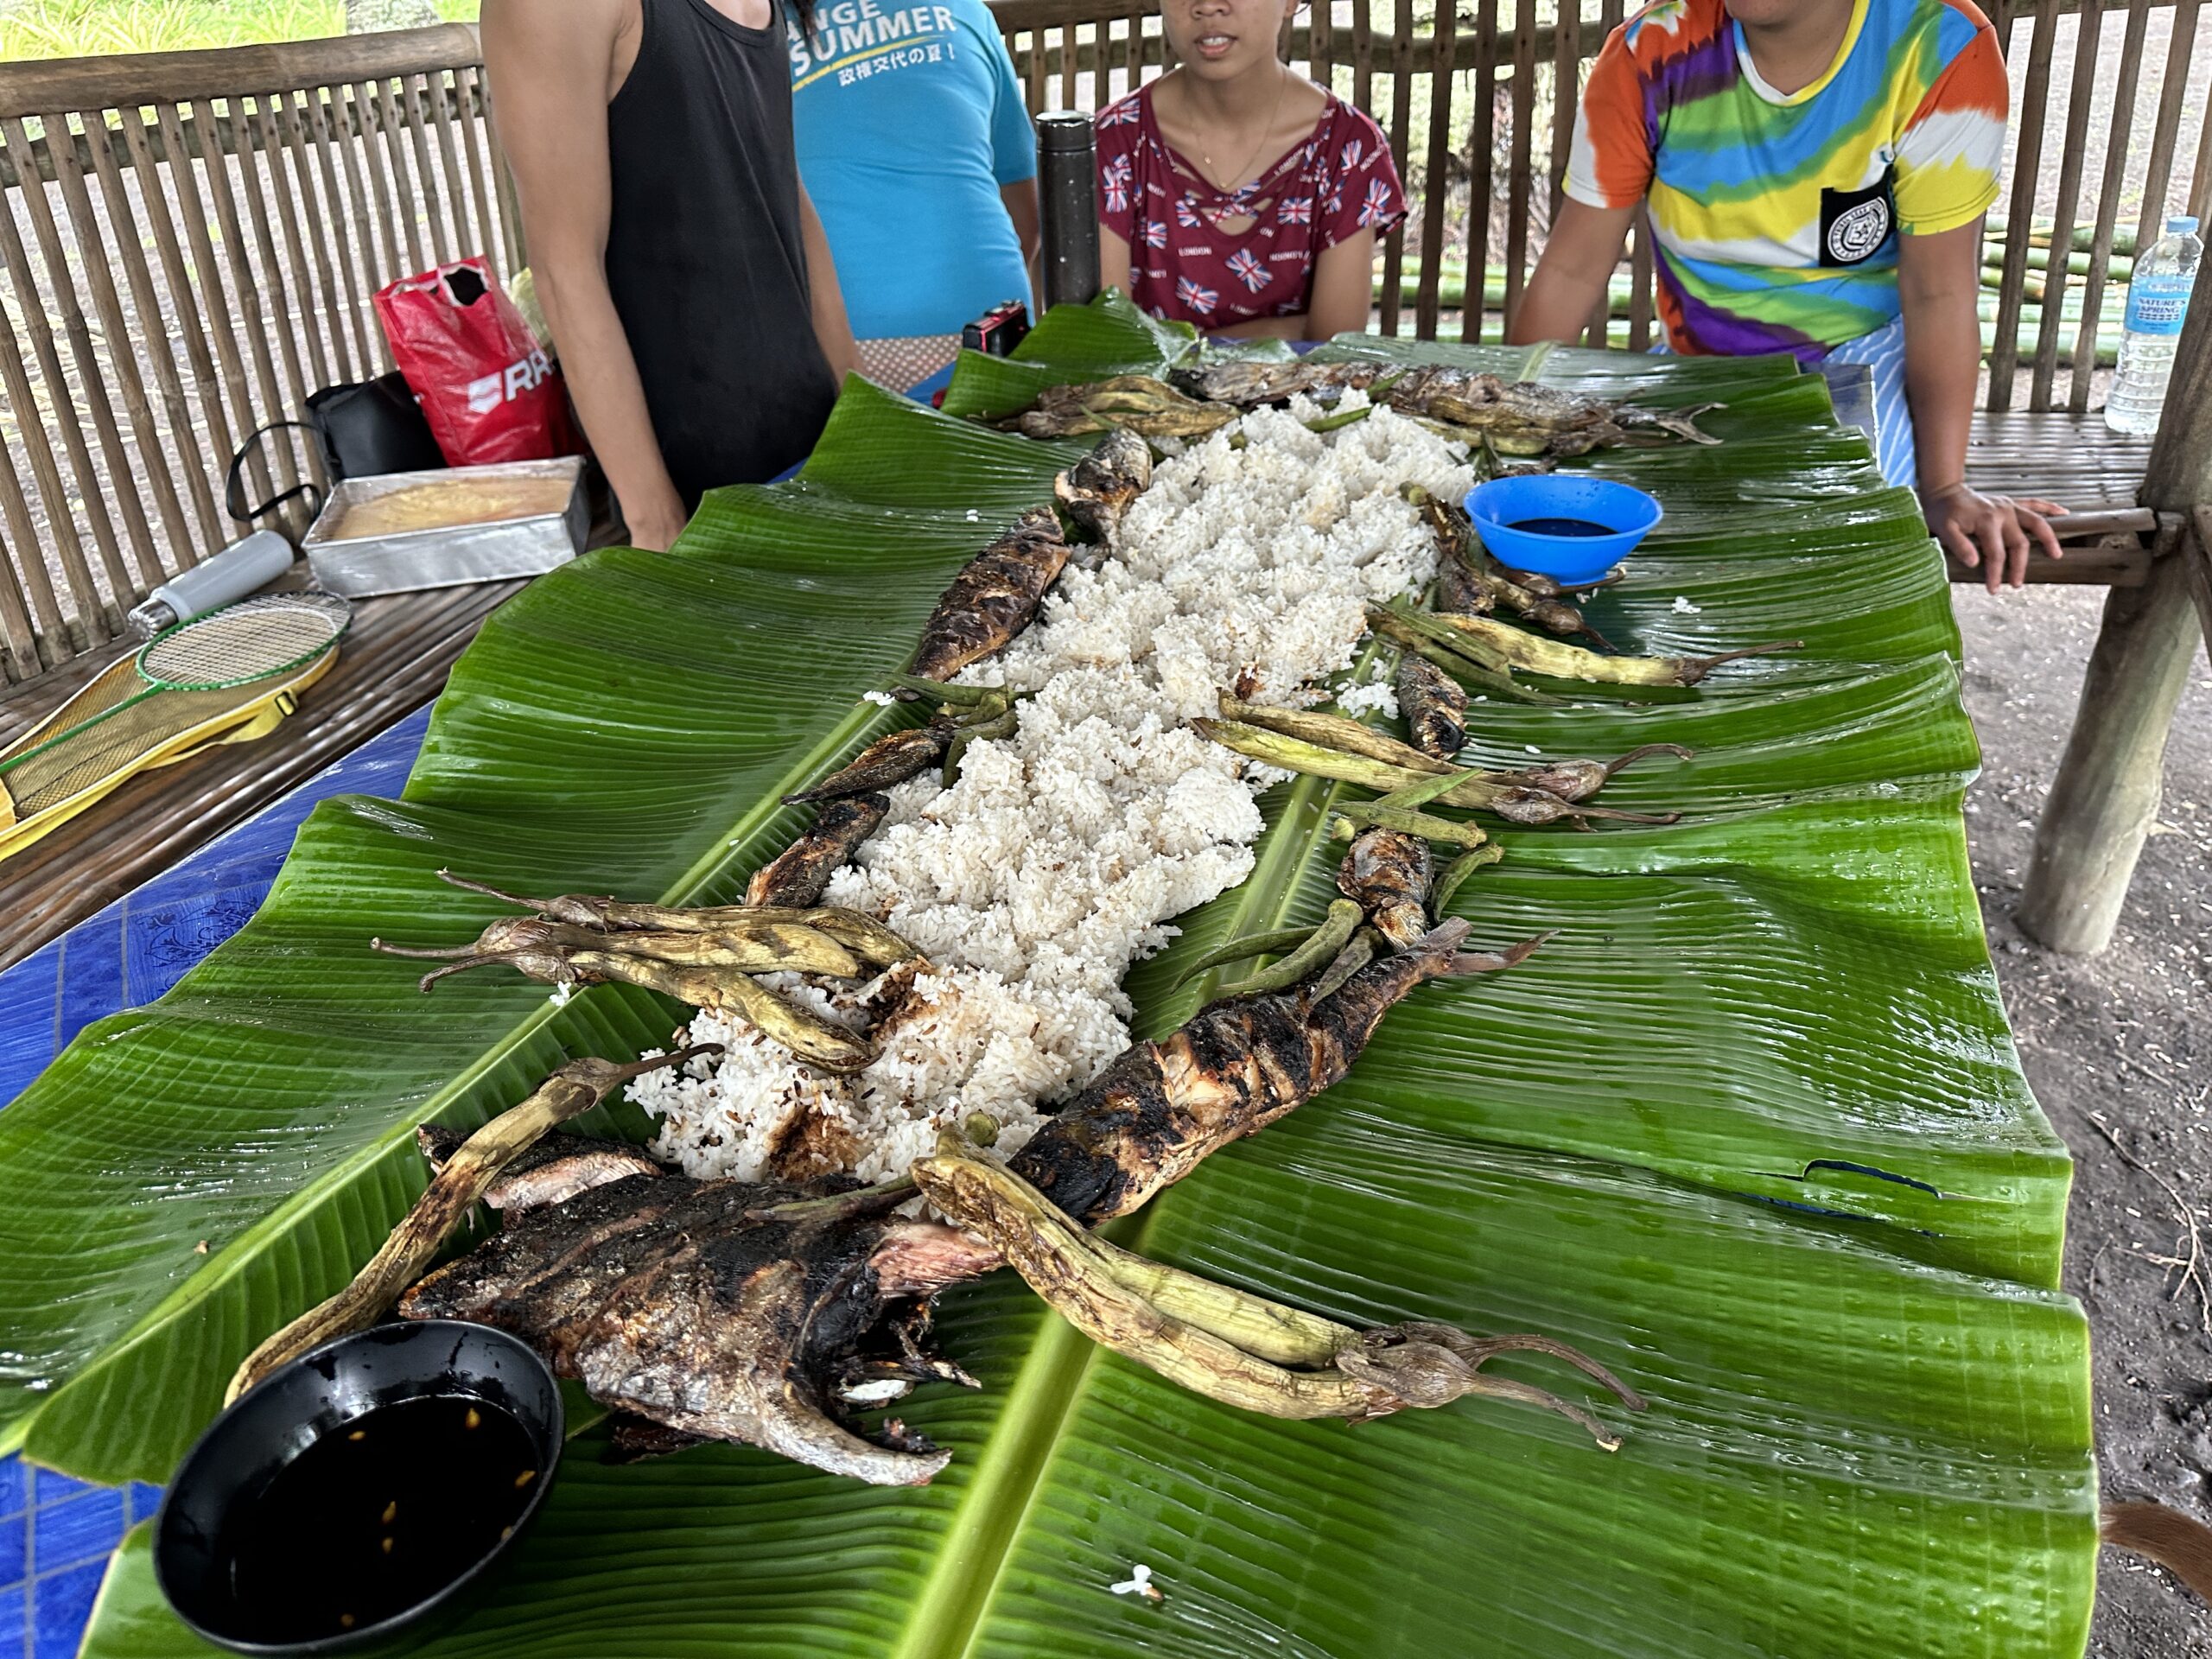 Boodle fight